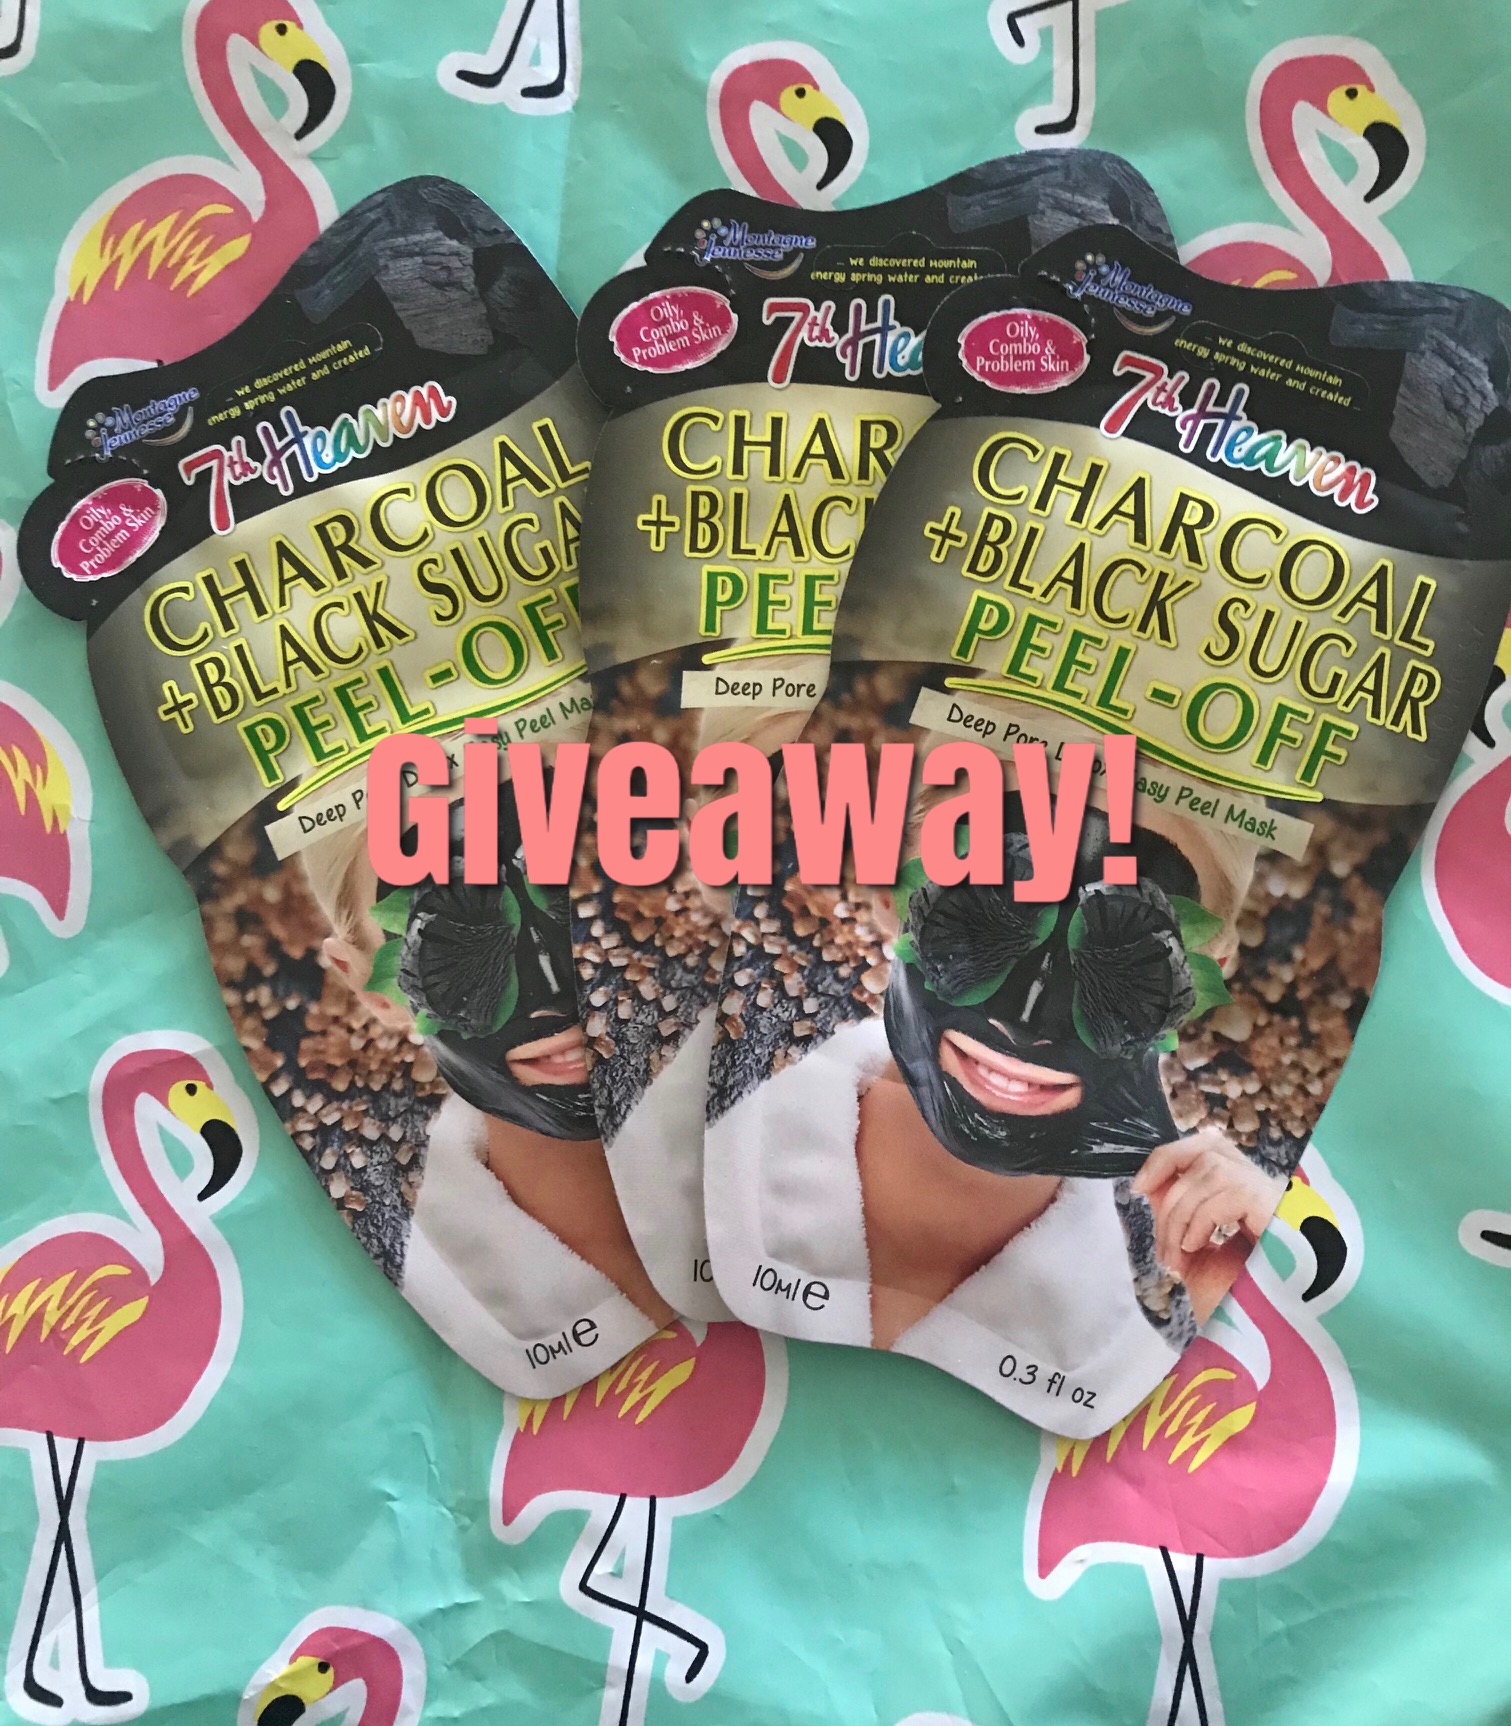 3 7th Heaven Charcoal & Black Sugar Peel-off Masks in their colorful single use packaging are the prize for my giveaway, neversaydiebeauty.com